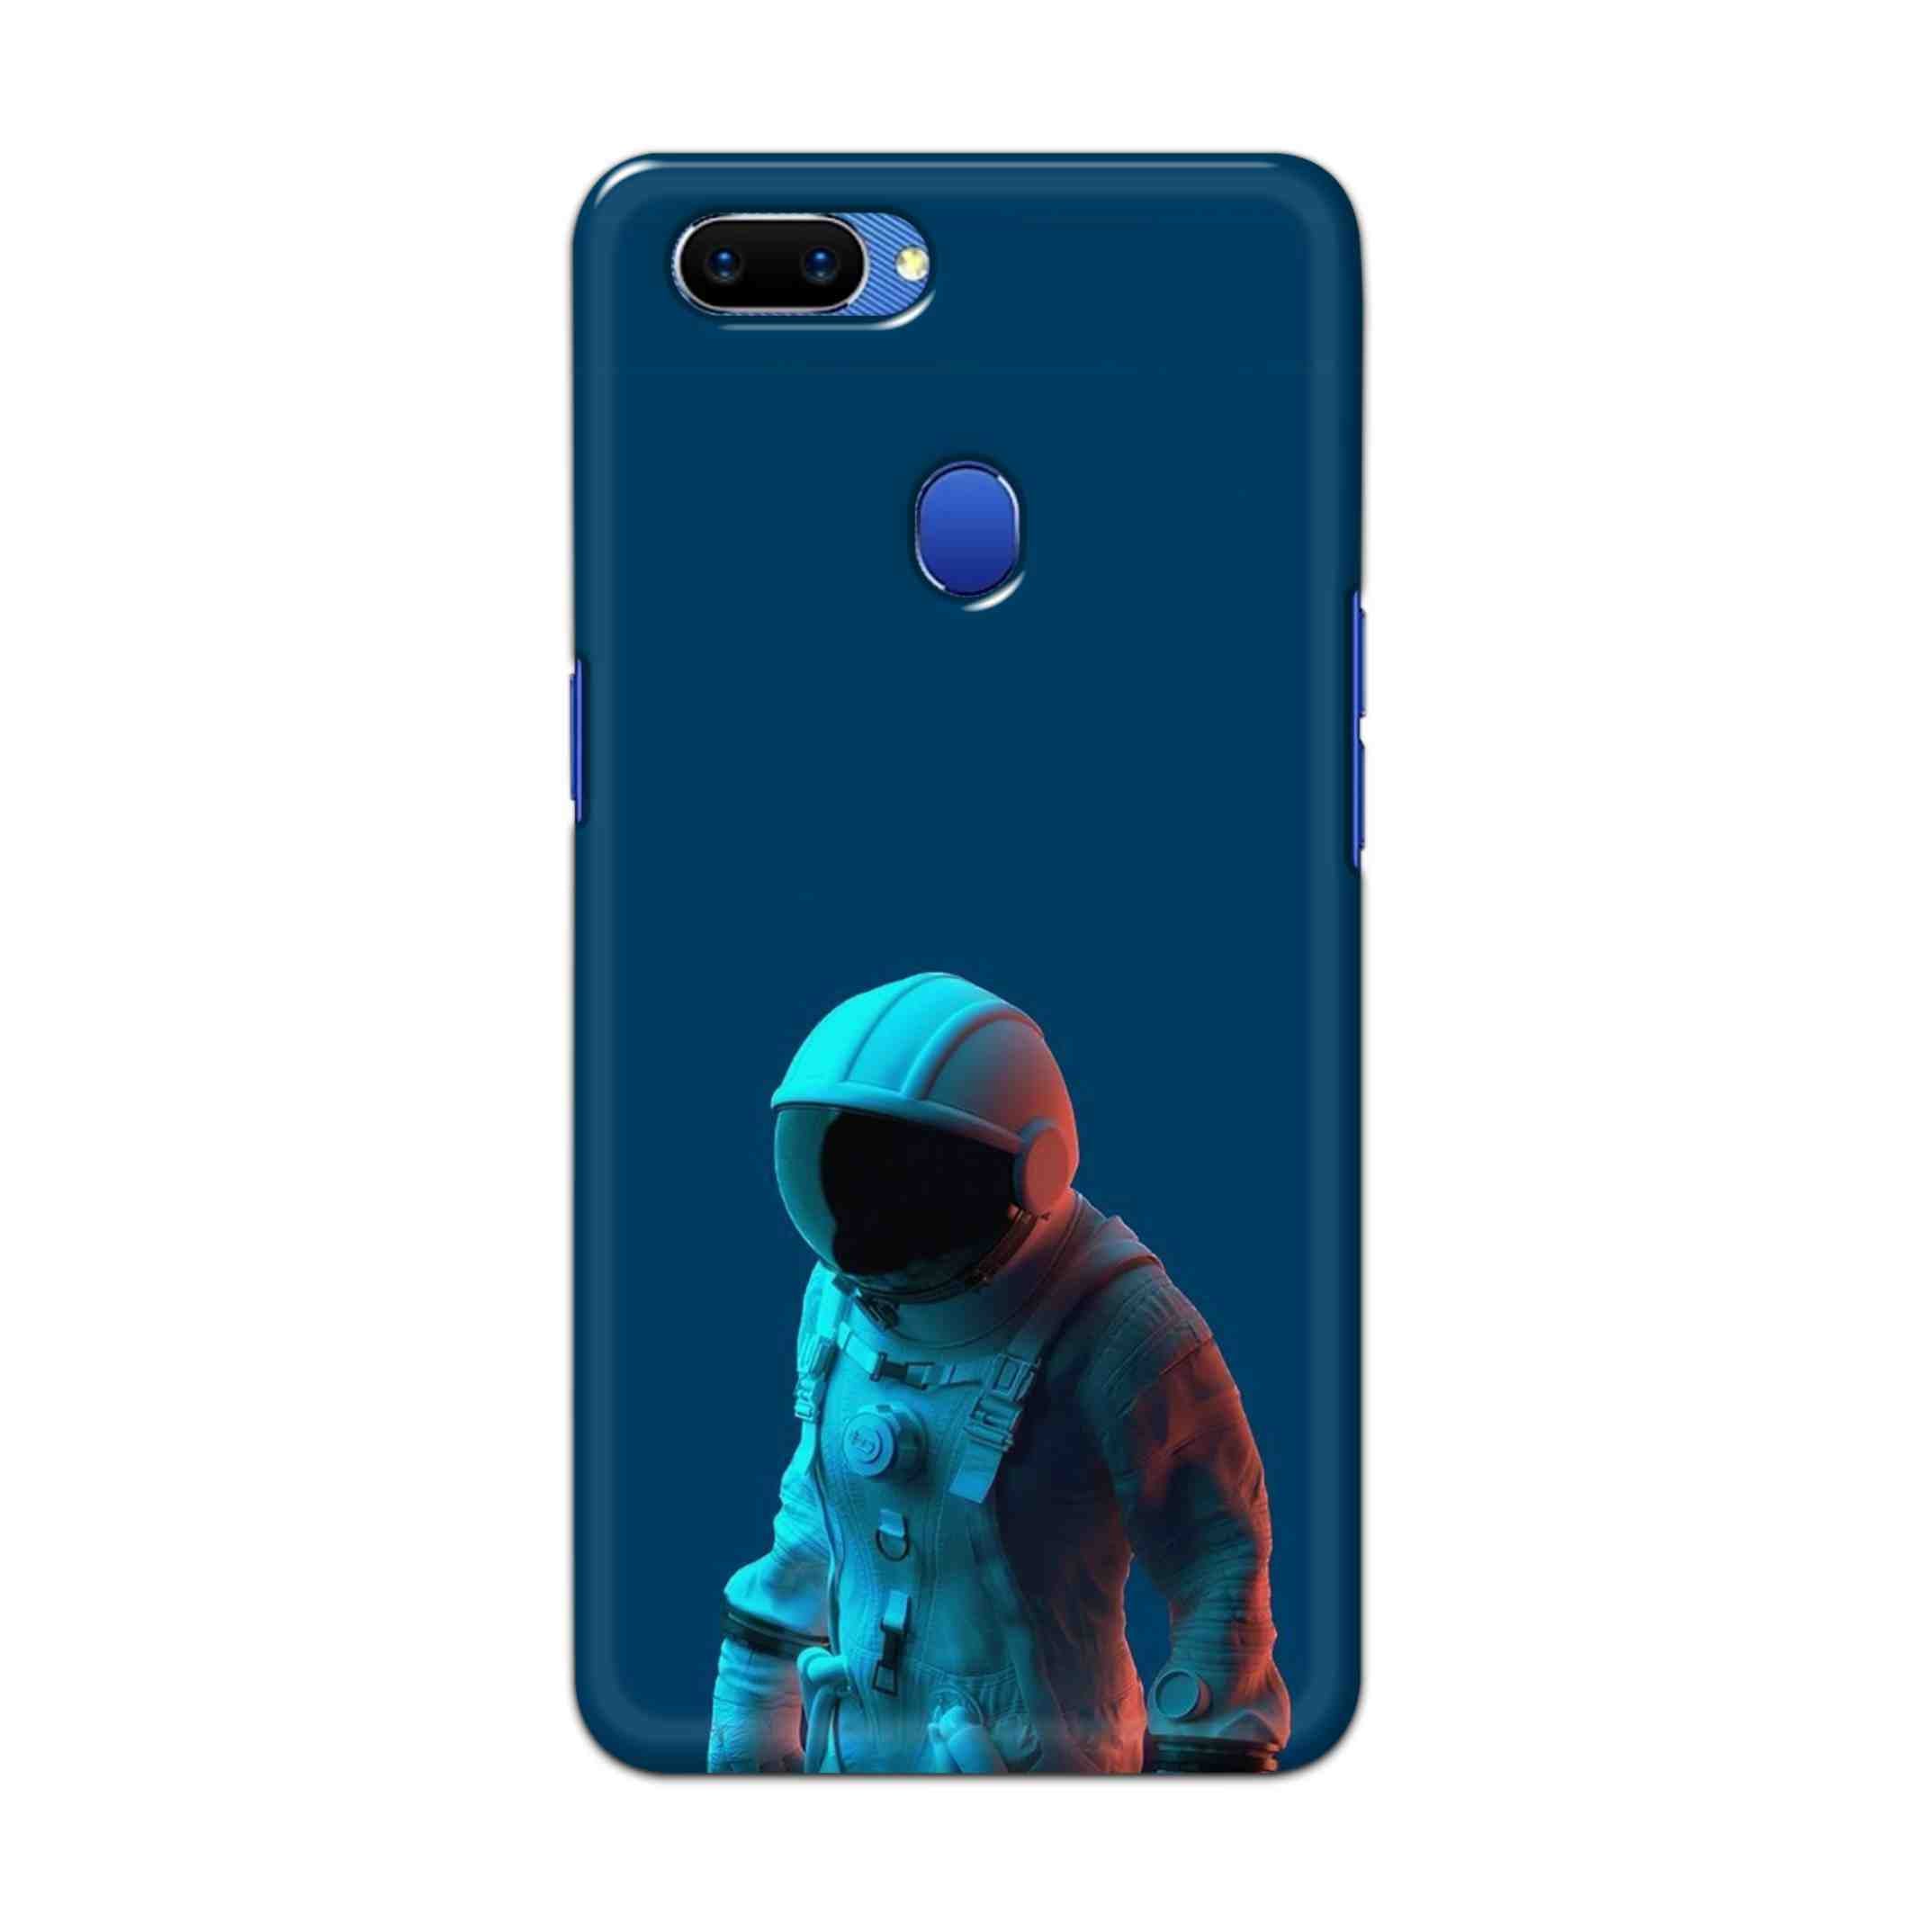 Buy Blue Astronaut Hard Back Mobile Phone Case Cover For Oppo A5 Online